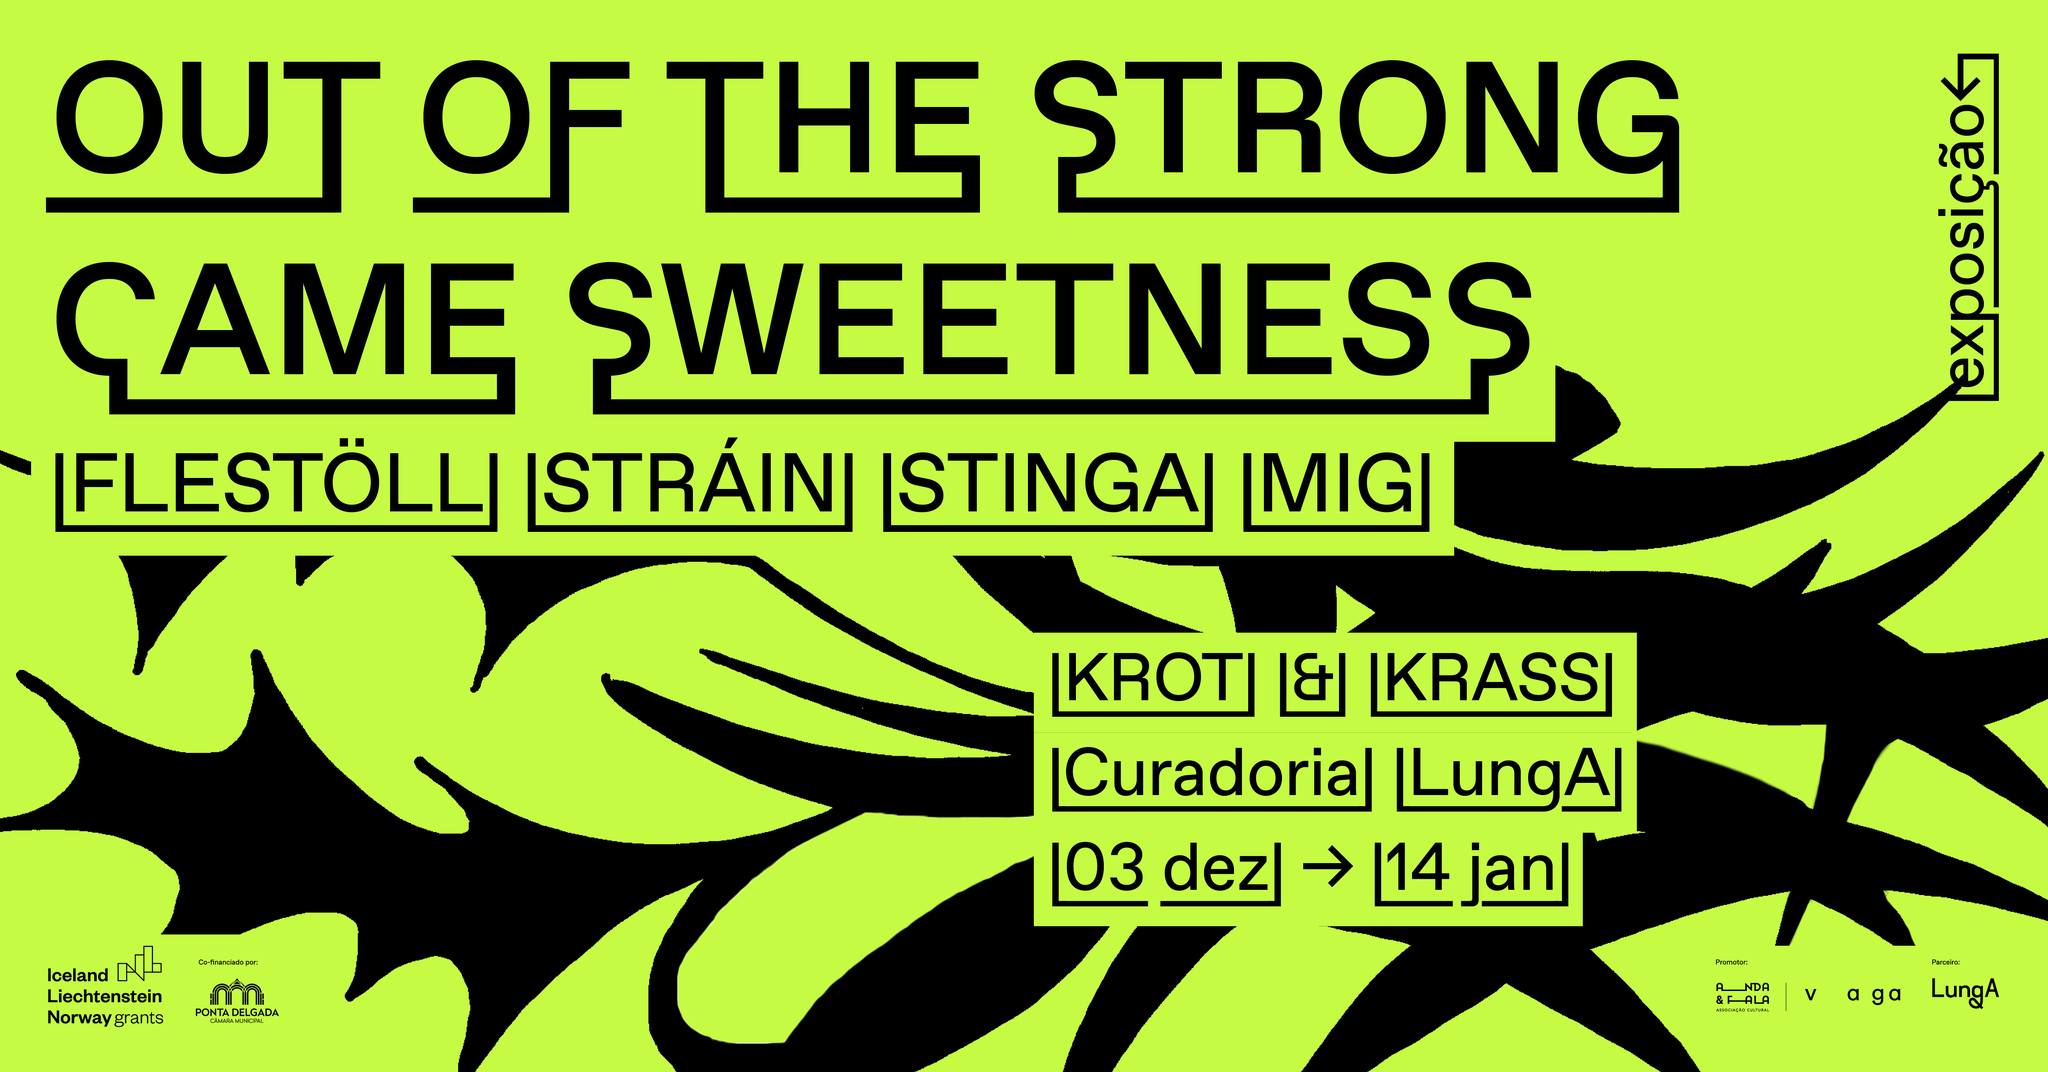 Out of the strong came sweetness, Krot & Krass